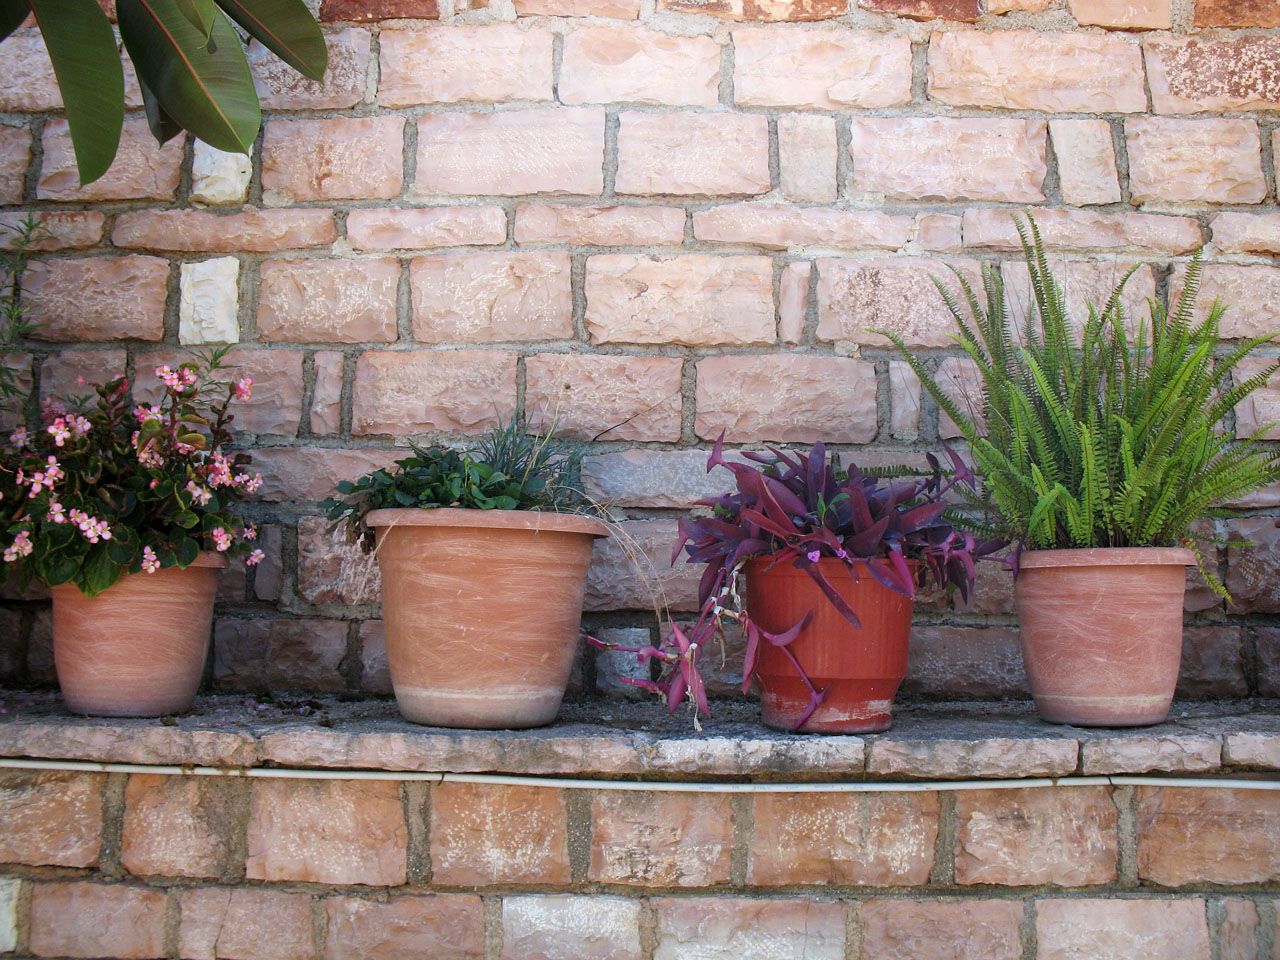 Brick wall with shelving for container plants